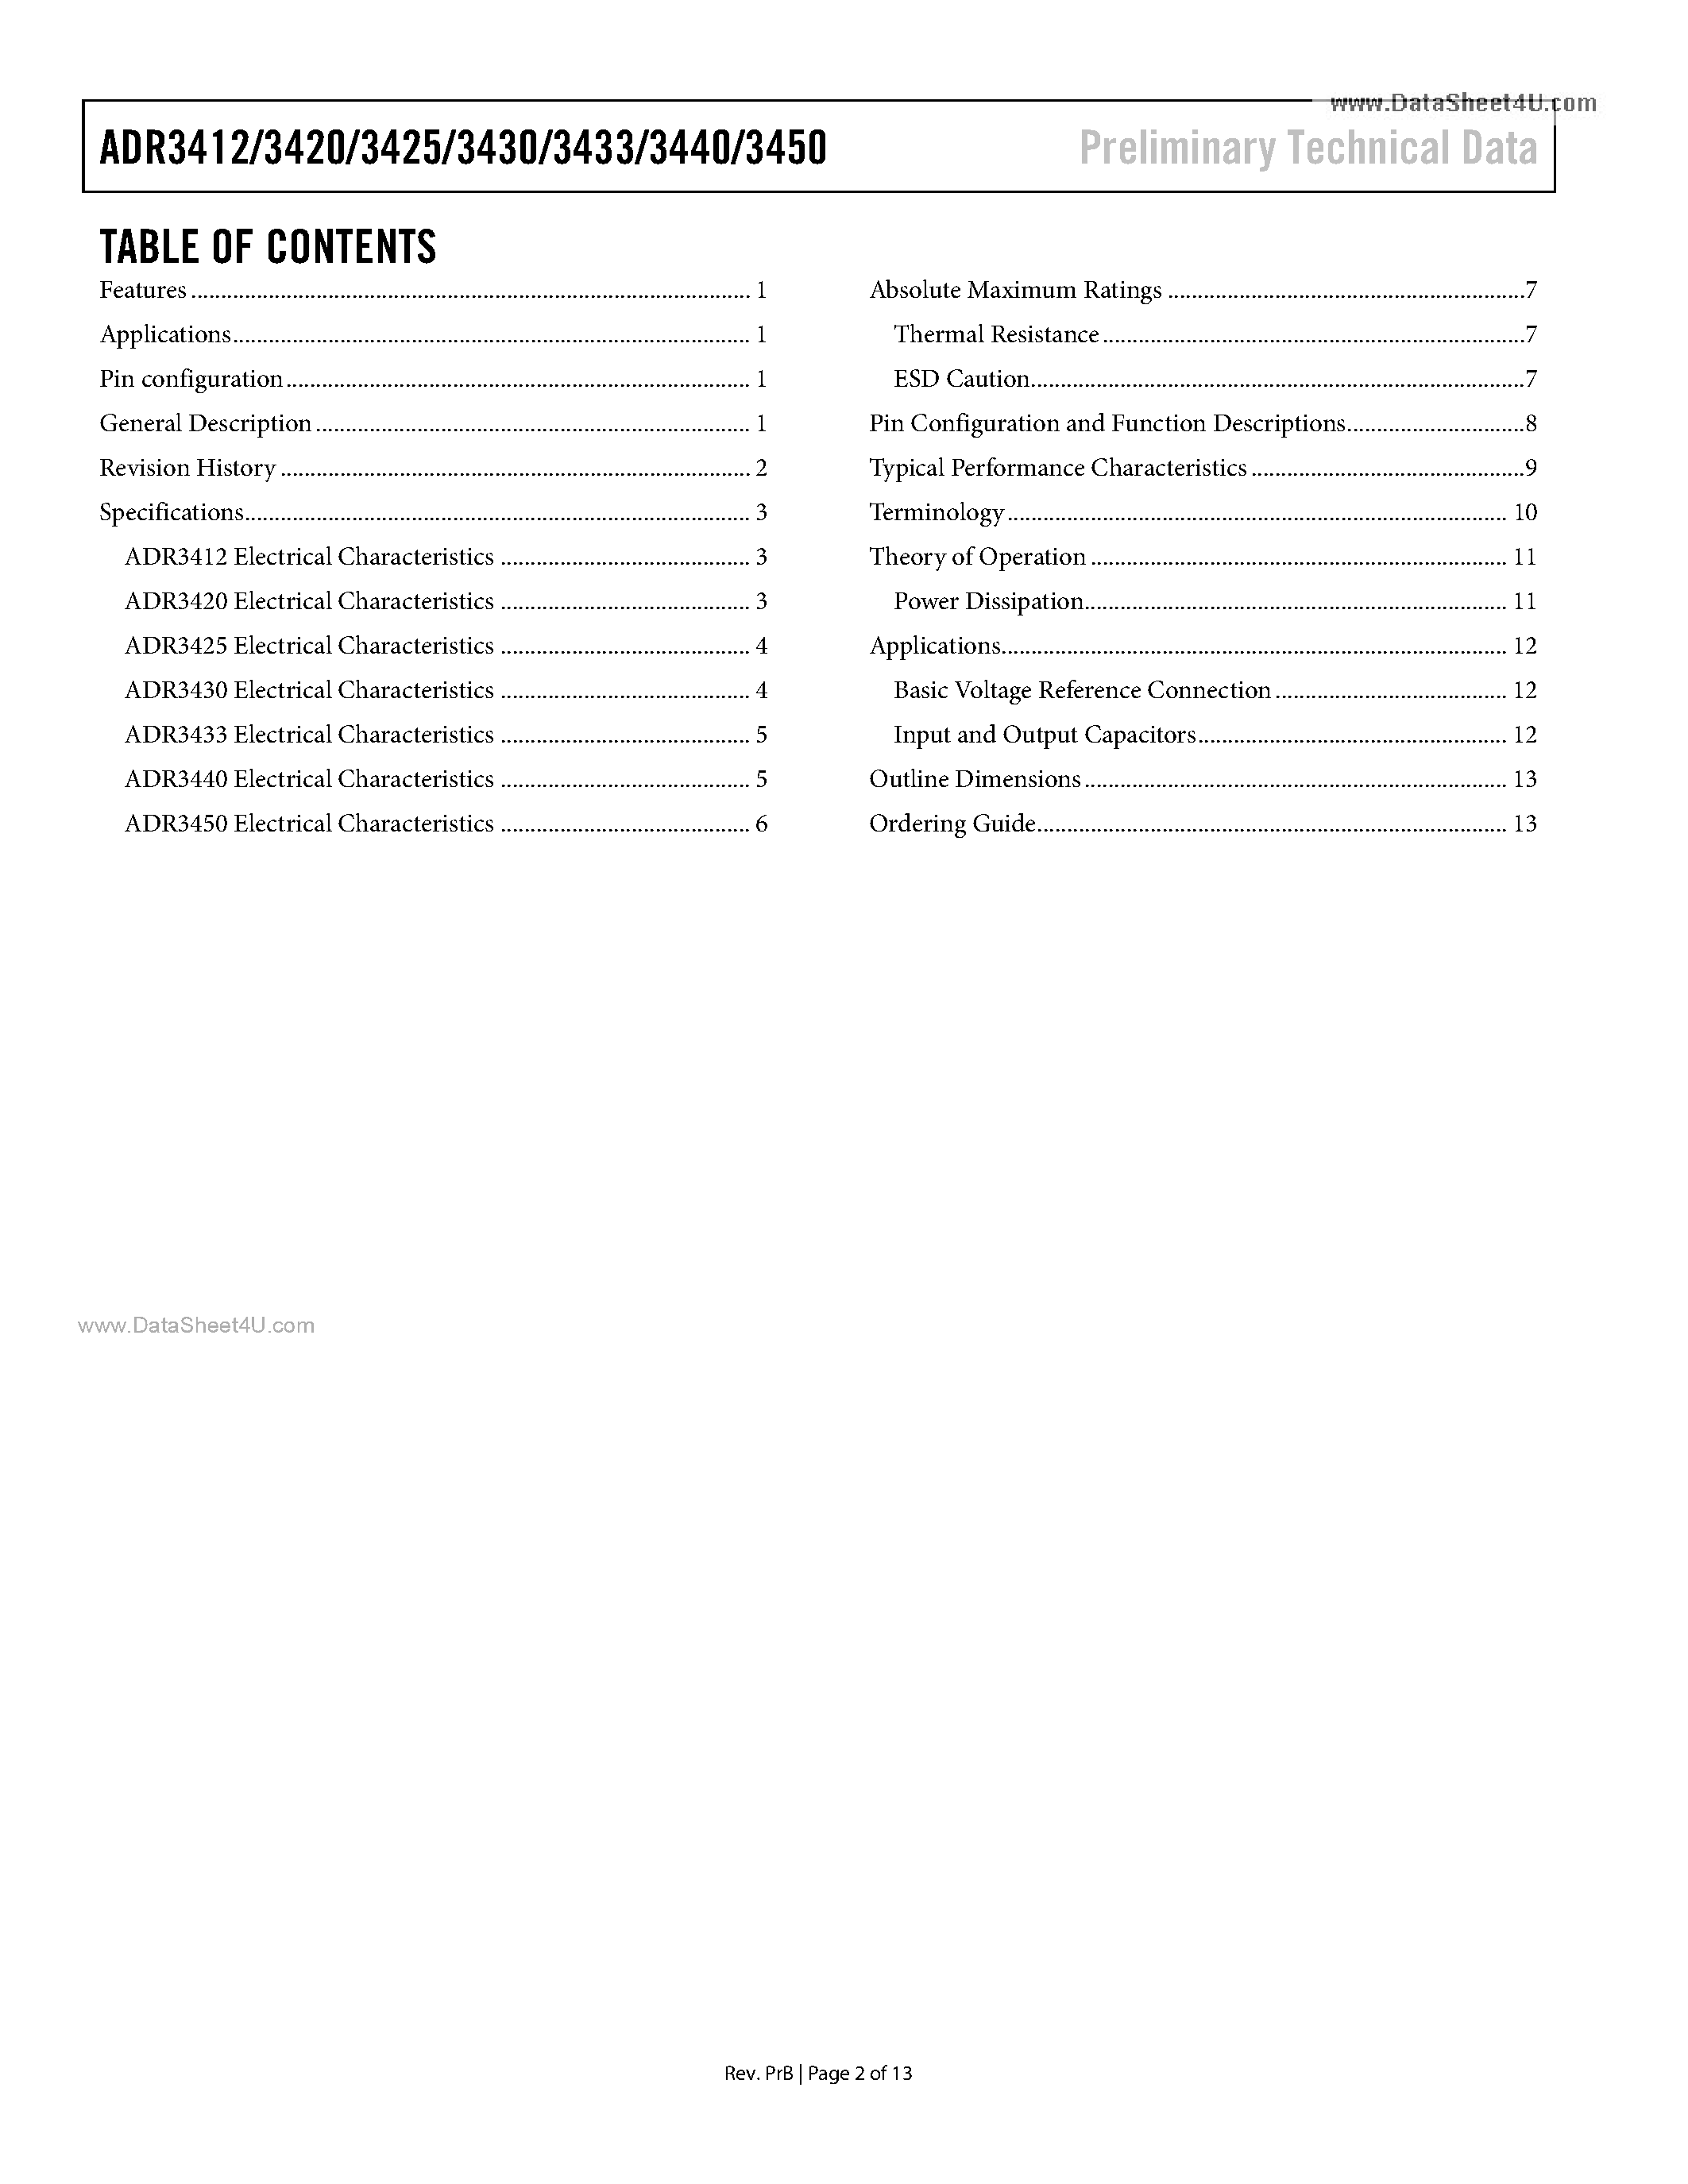 Datasheet ADR3412 - (ADR3412 - ADR3450) HIGH-ACCURACY VOLTAGE REFERENCES page 2